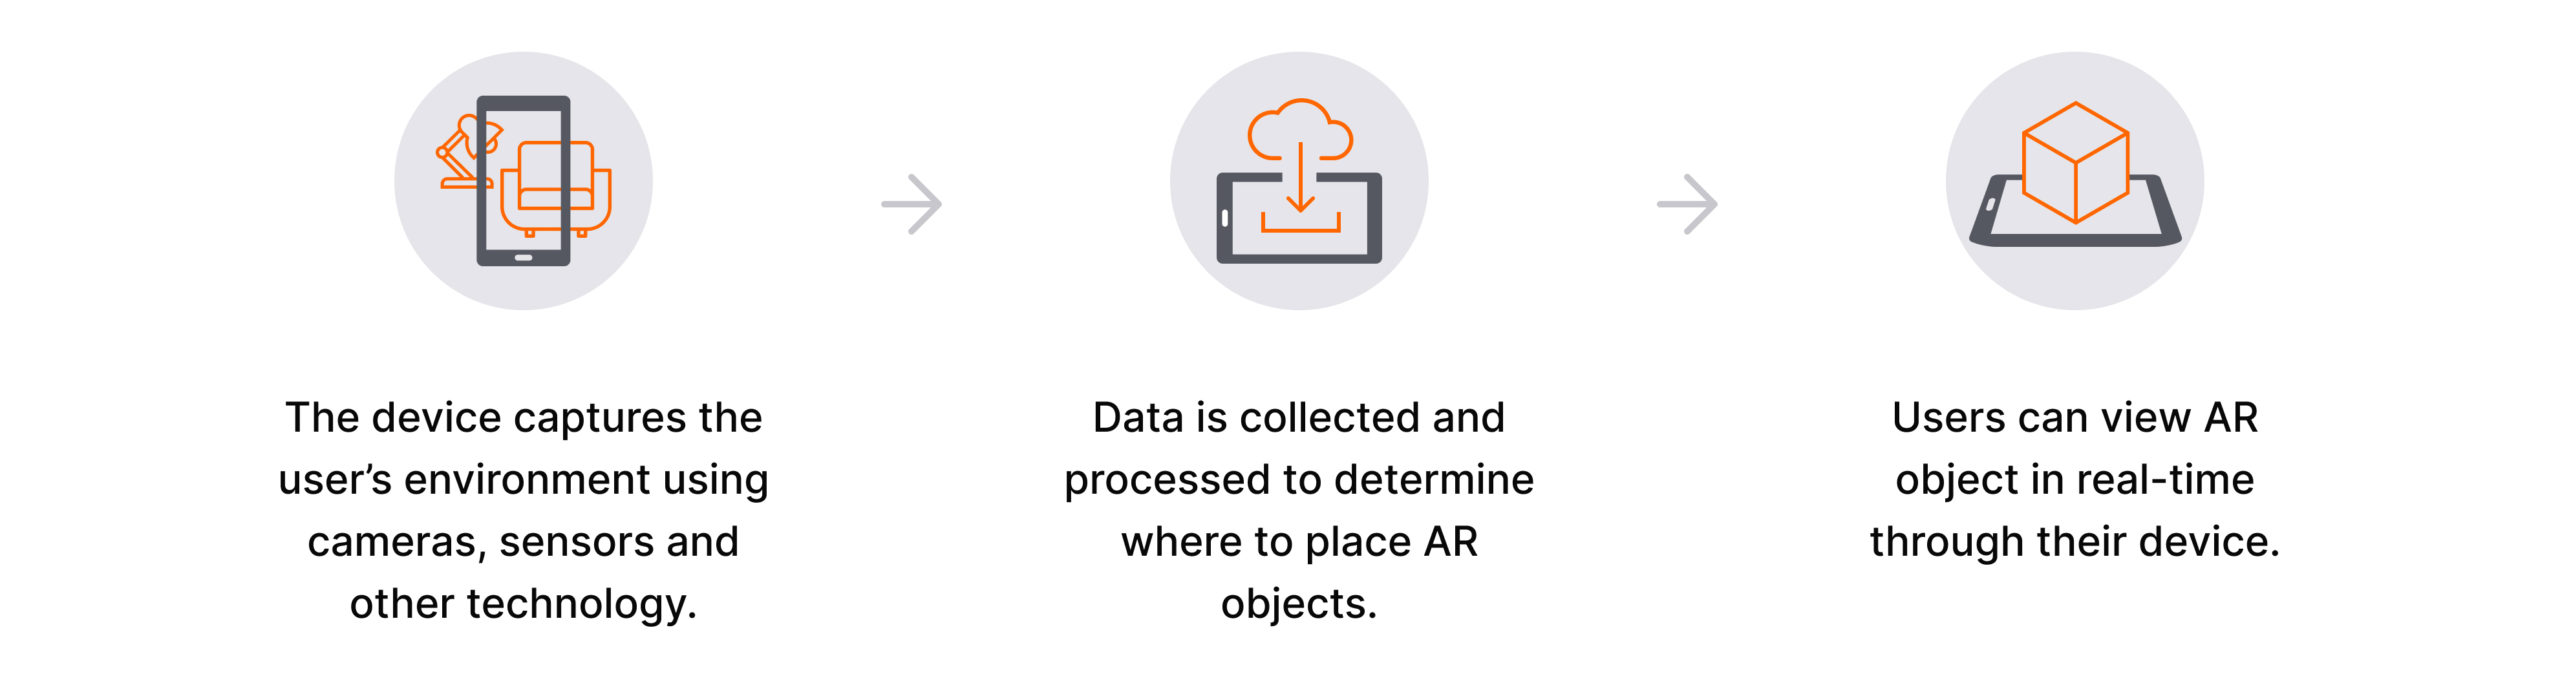 A diagram that highlights how augmented reality work in 3 easy to follow steps.